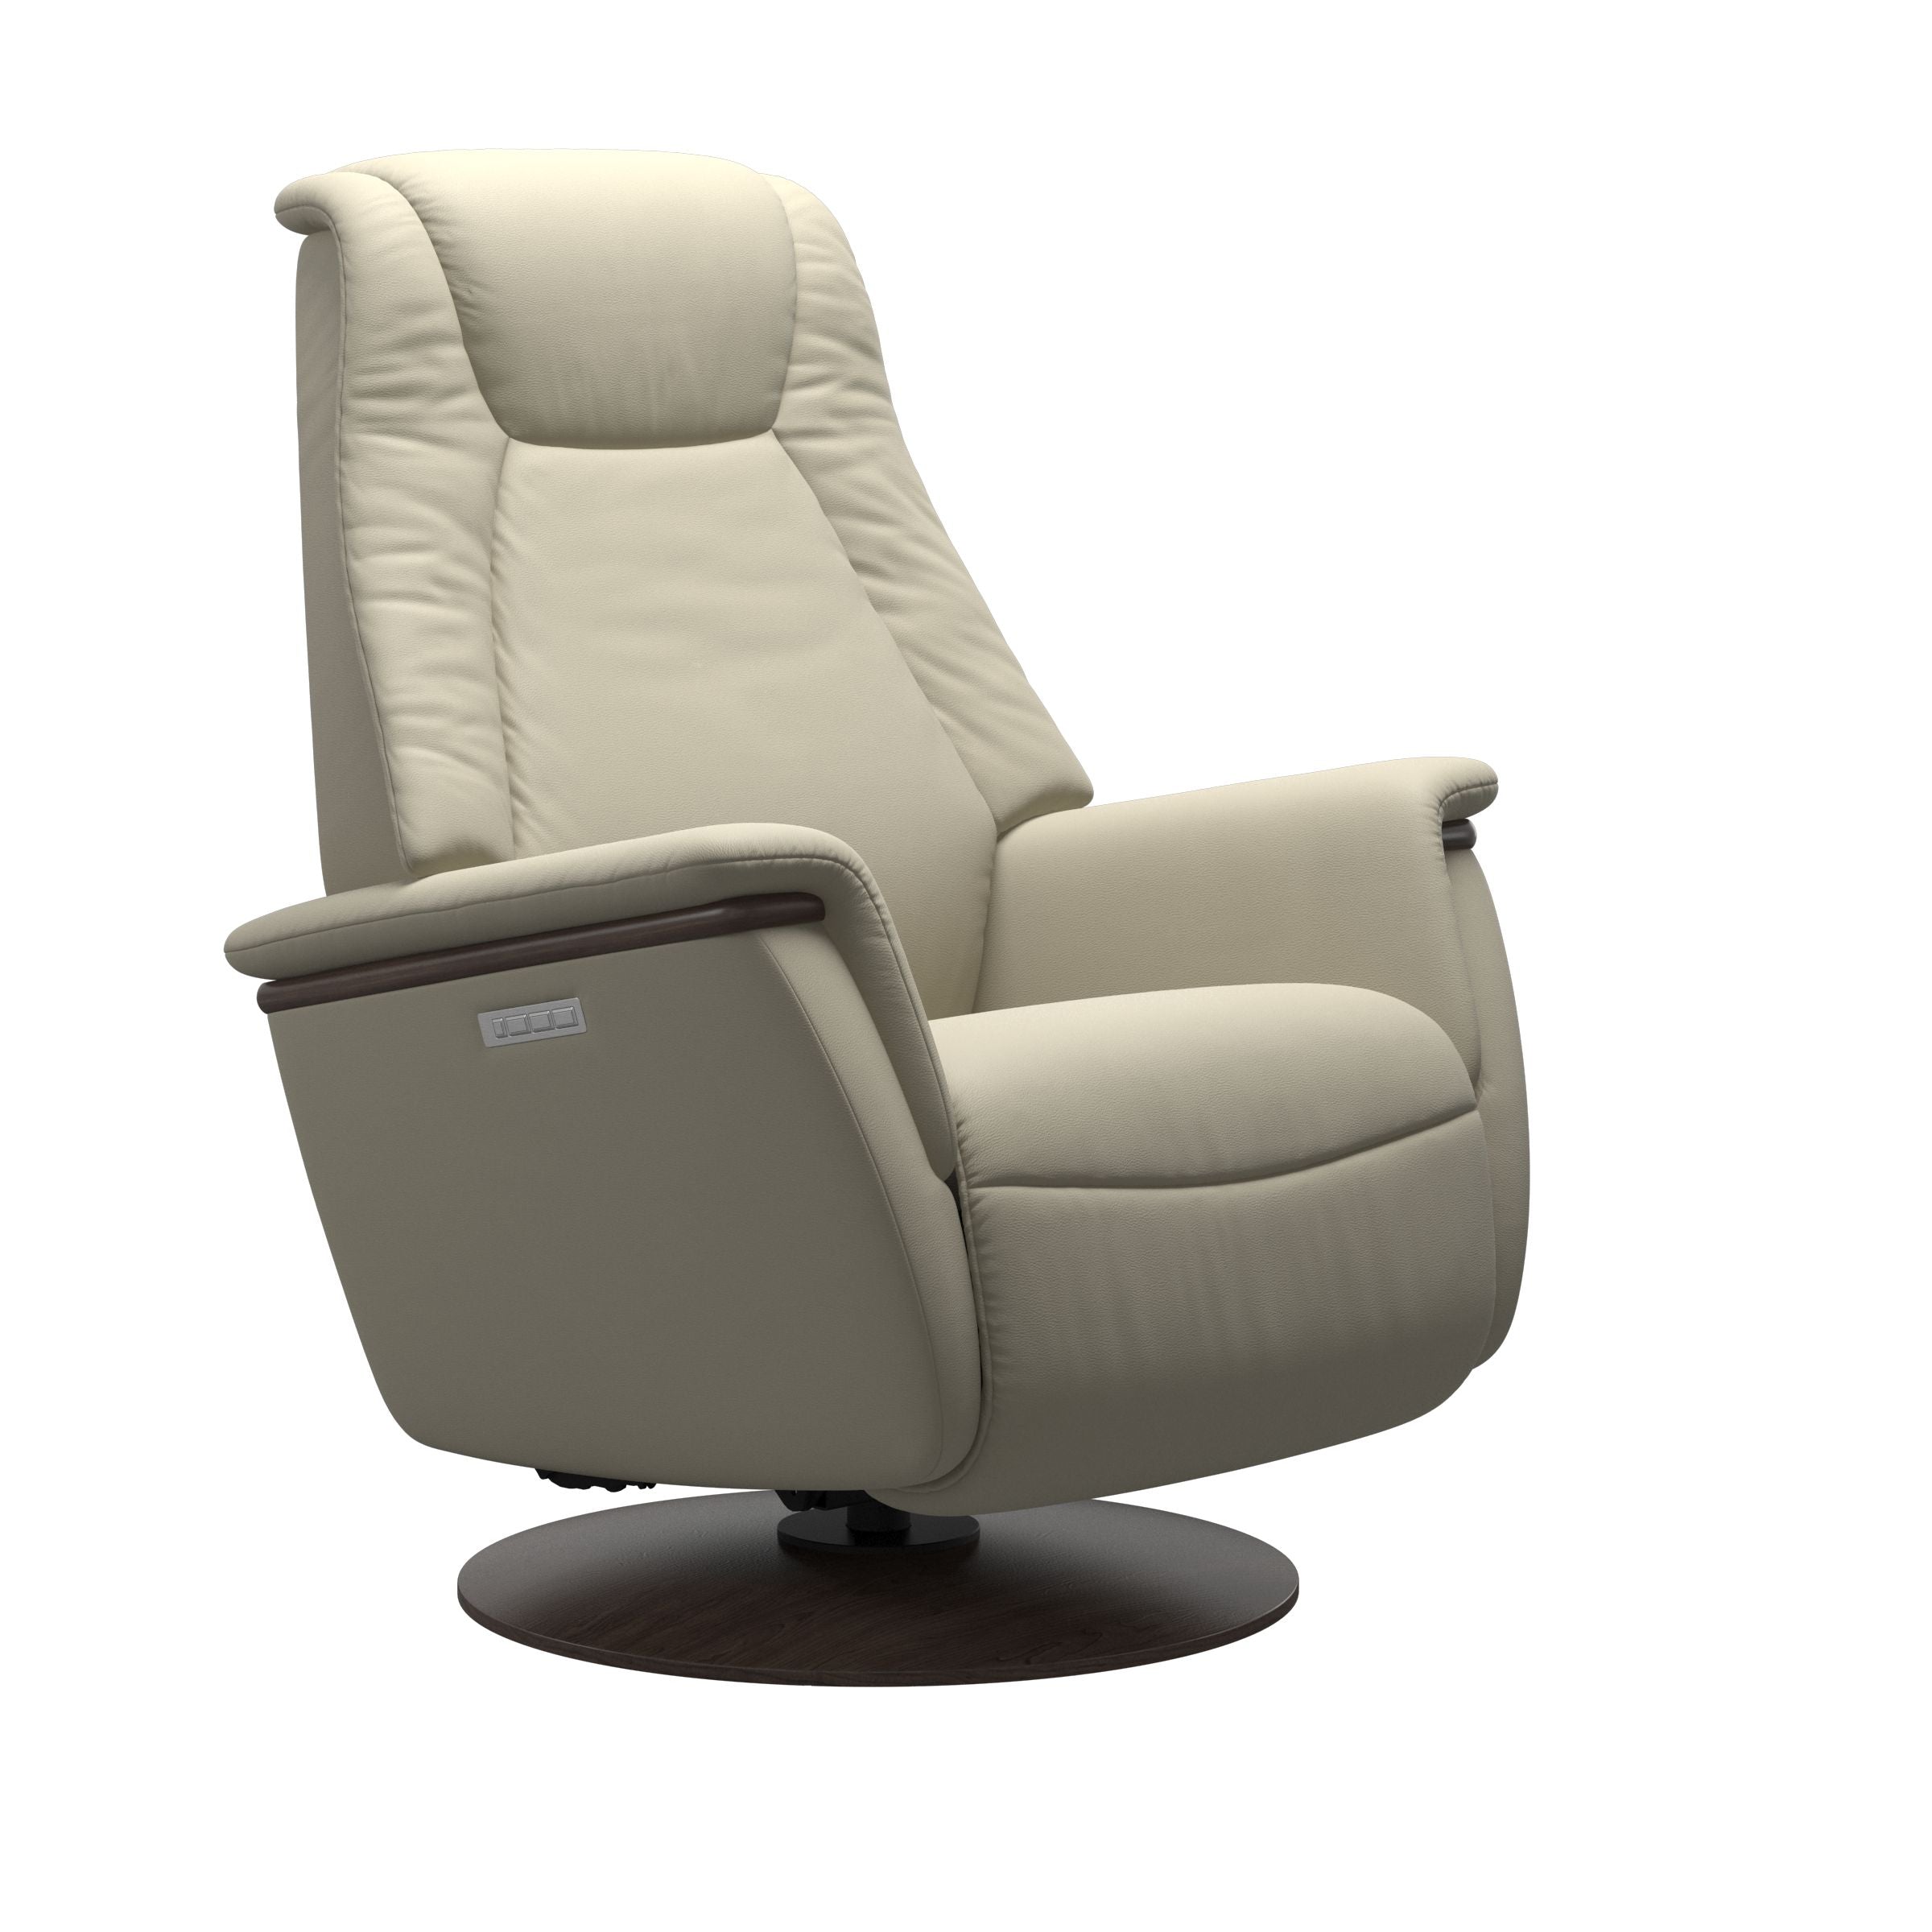 Stressless Max Large Recliner with Wood Moon Base